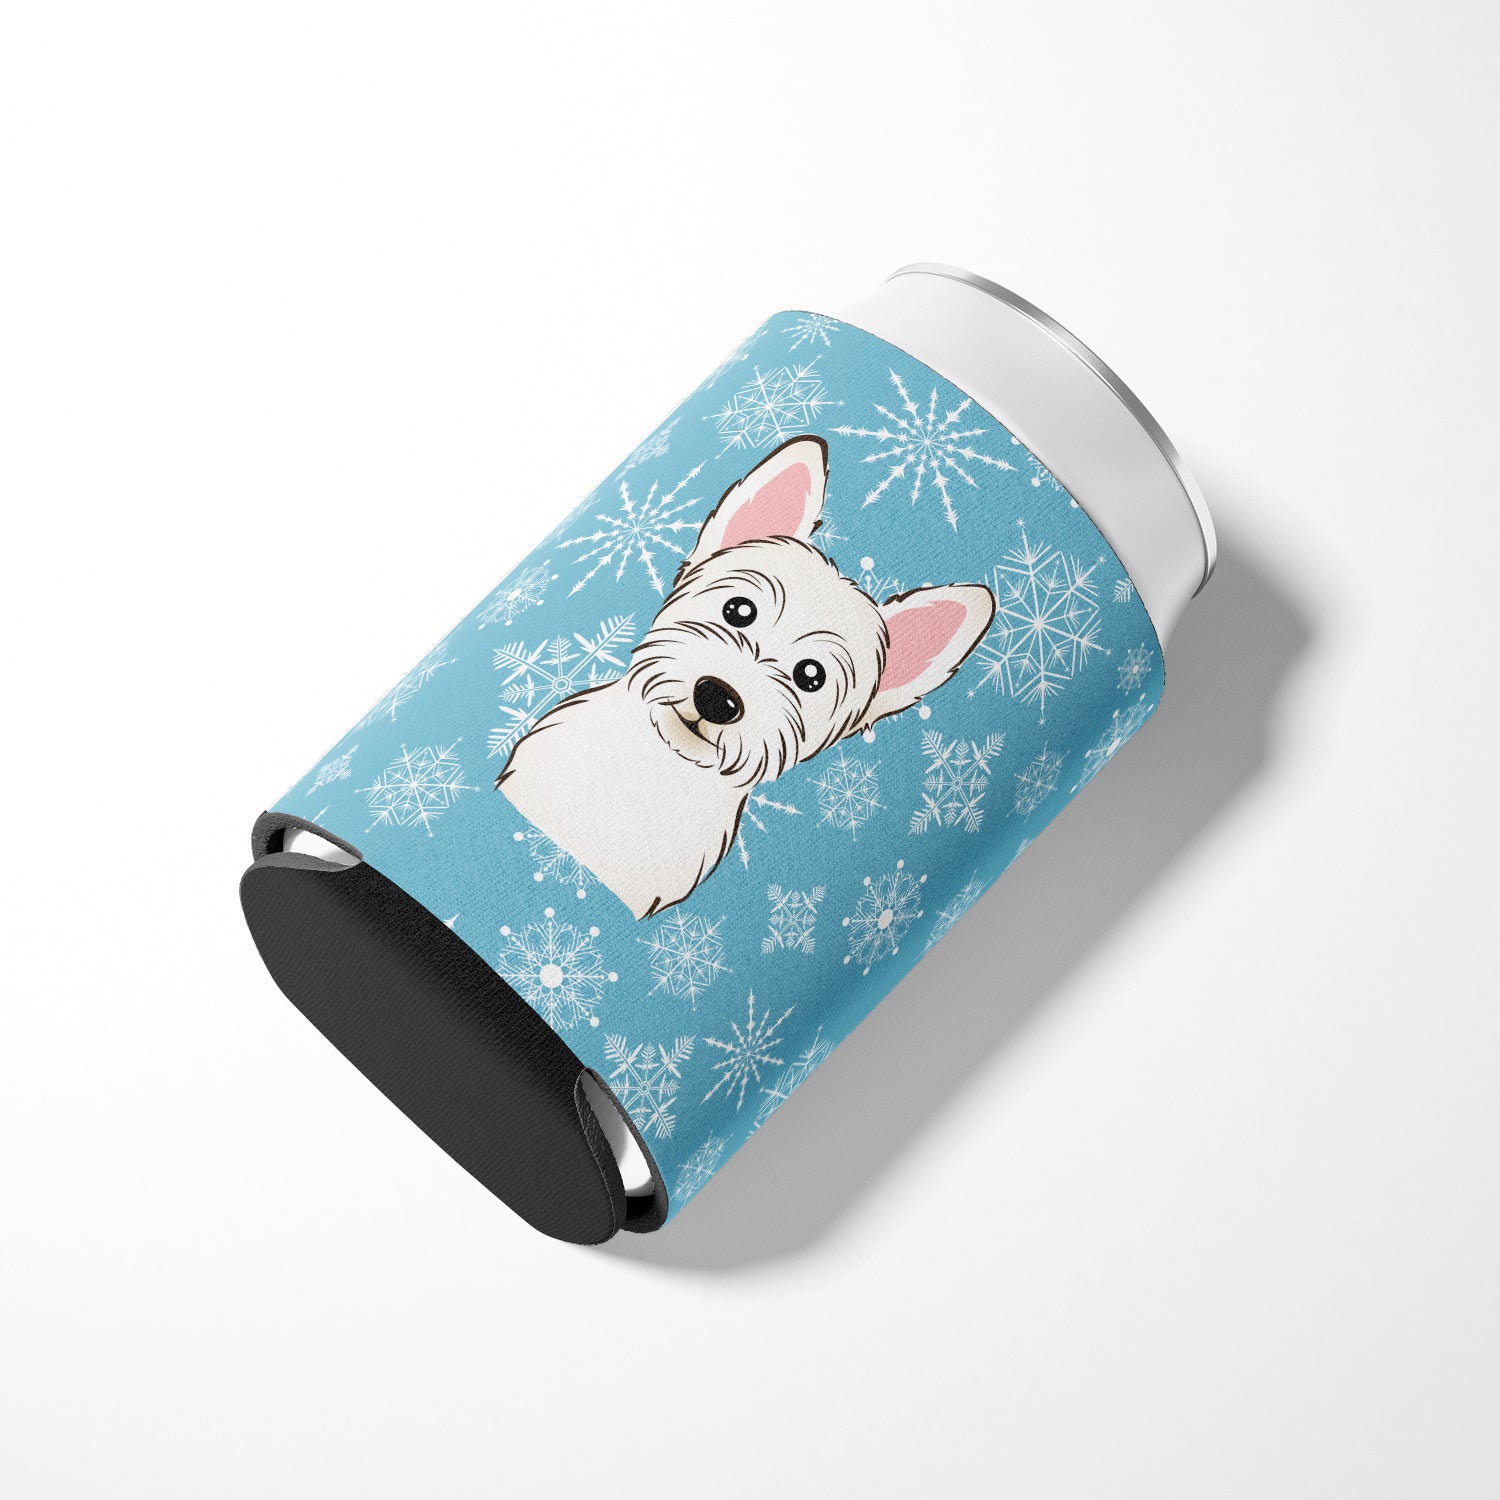 Snowflake Westie Can or Bottle Hugger BB1660CC